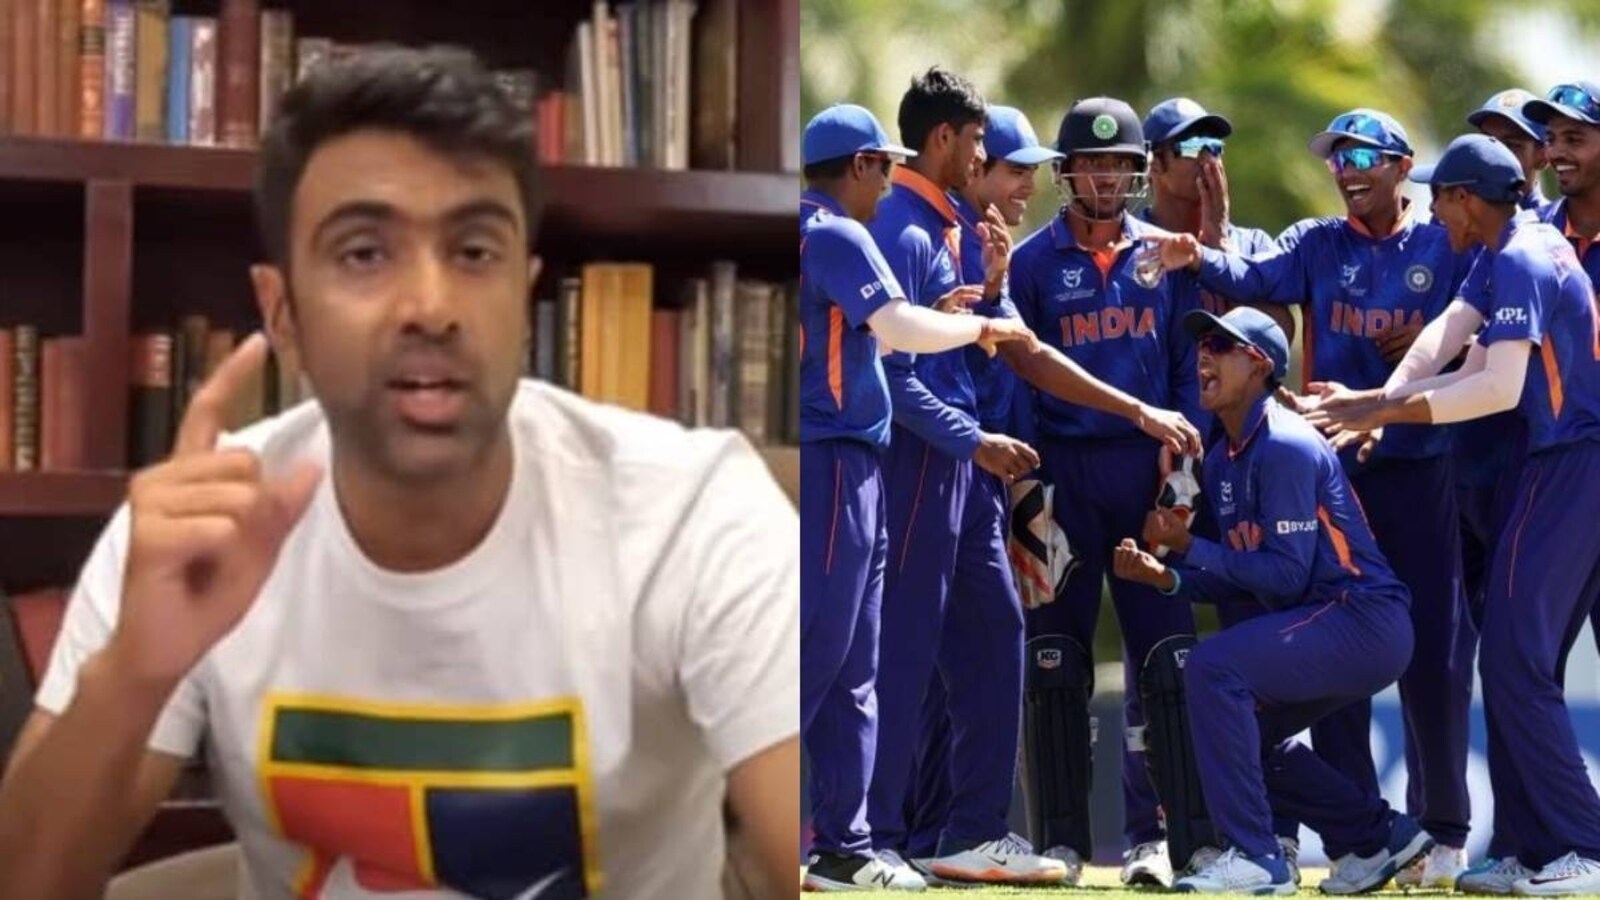 Hindi News: ‘Should attract 5-10 bids’: Ashwin makes huge IPL auction prediction on IND’s U19 star; has his say on Baby AB’s chances